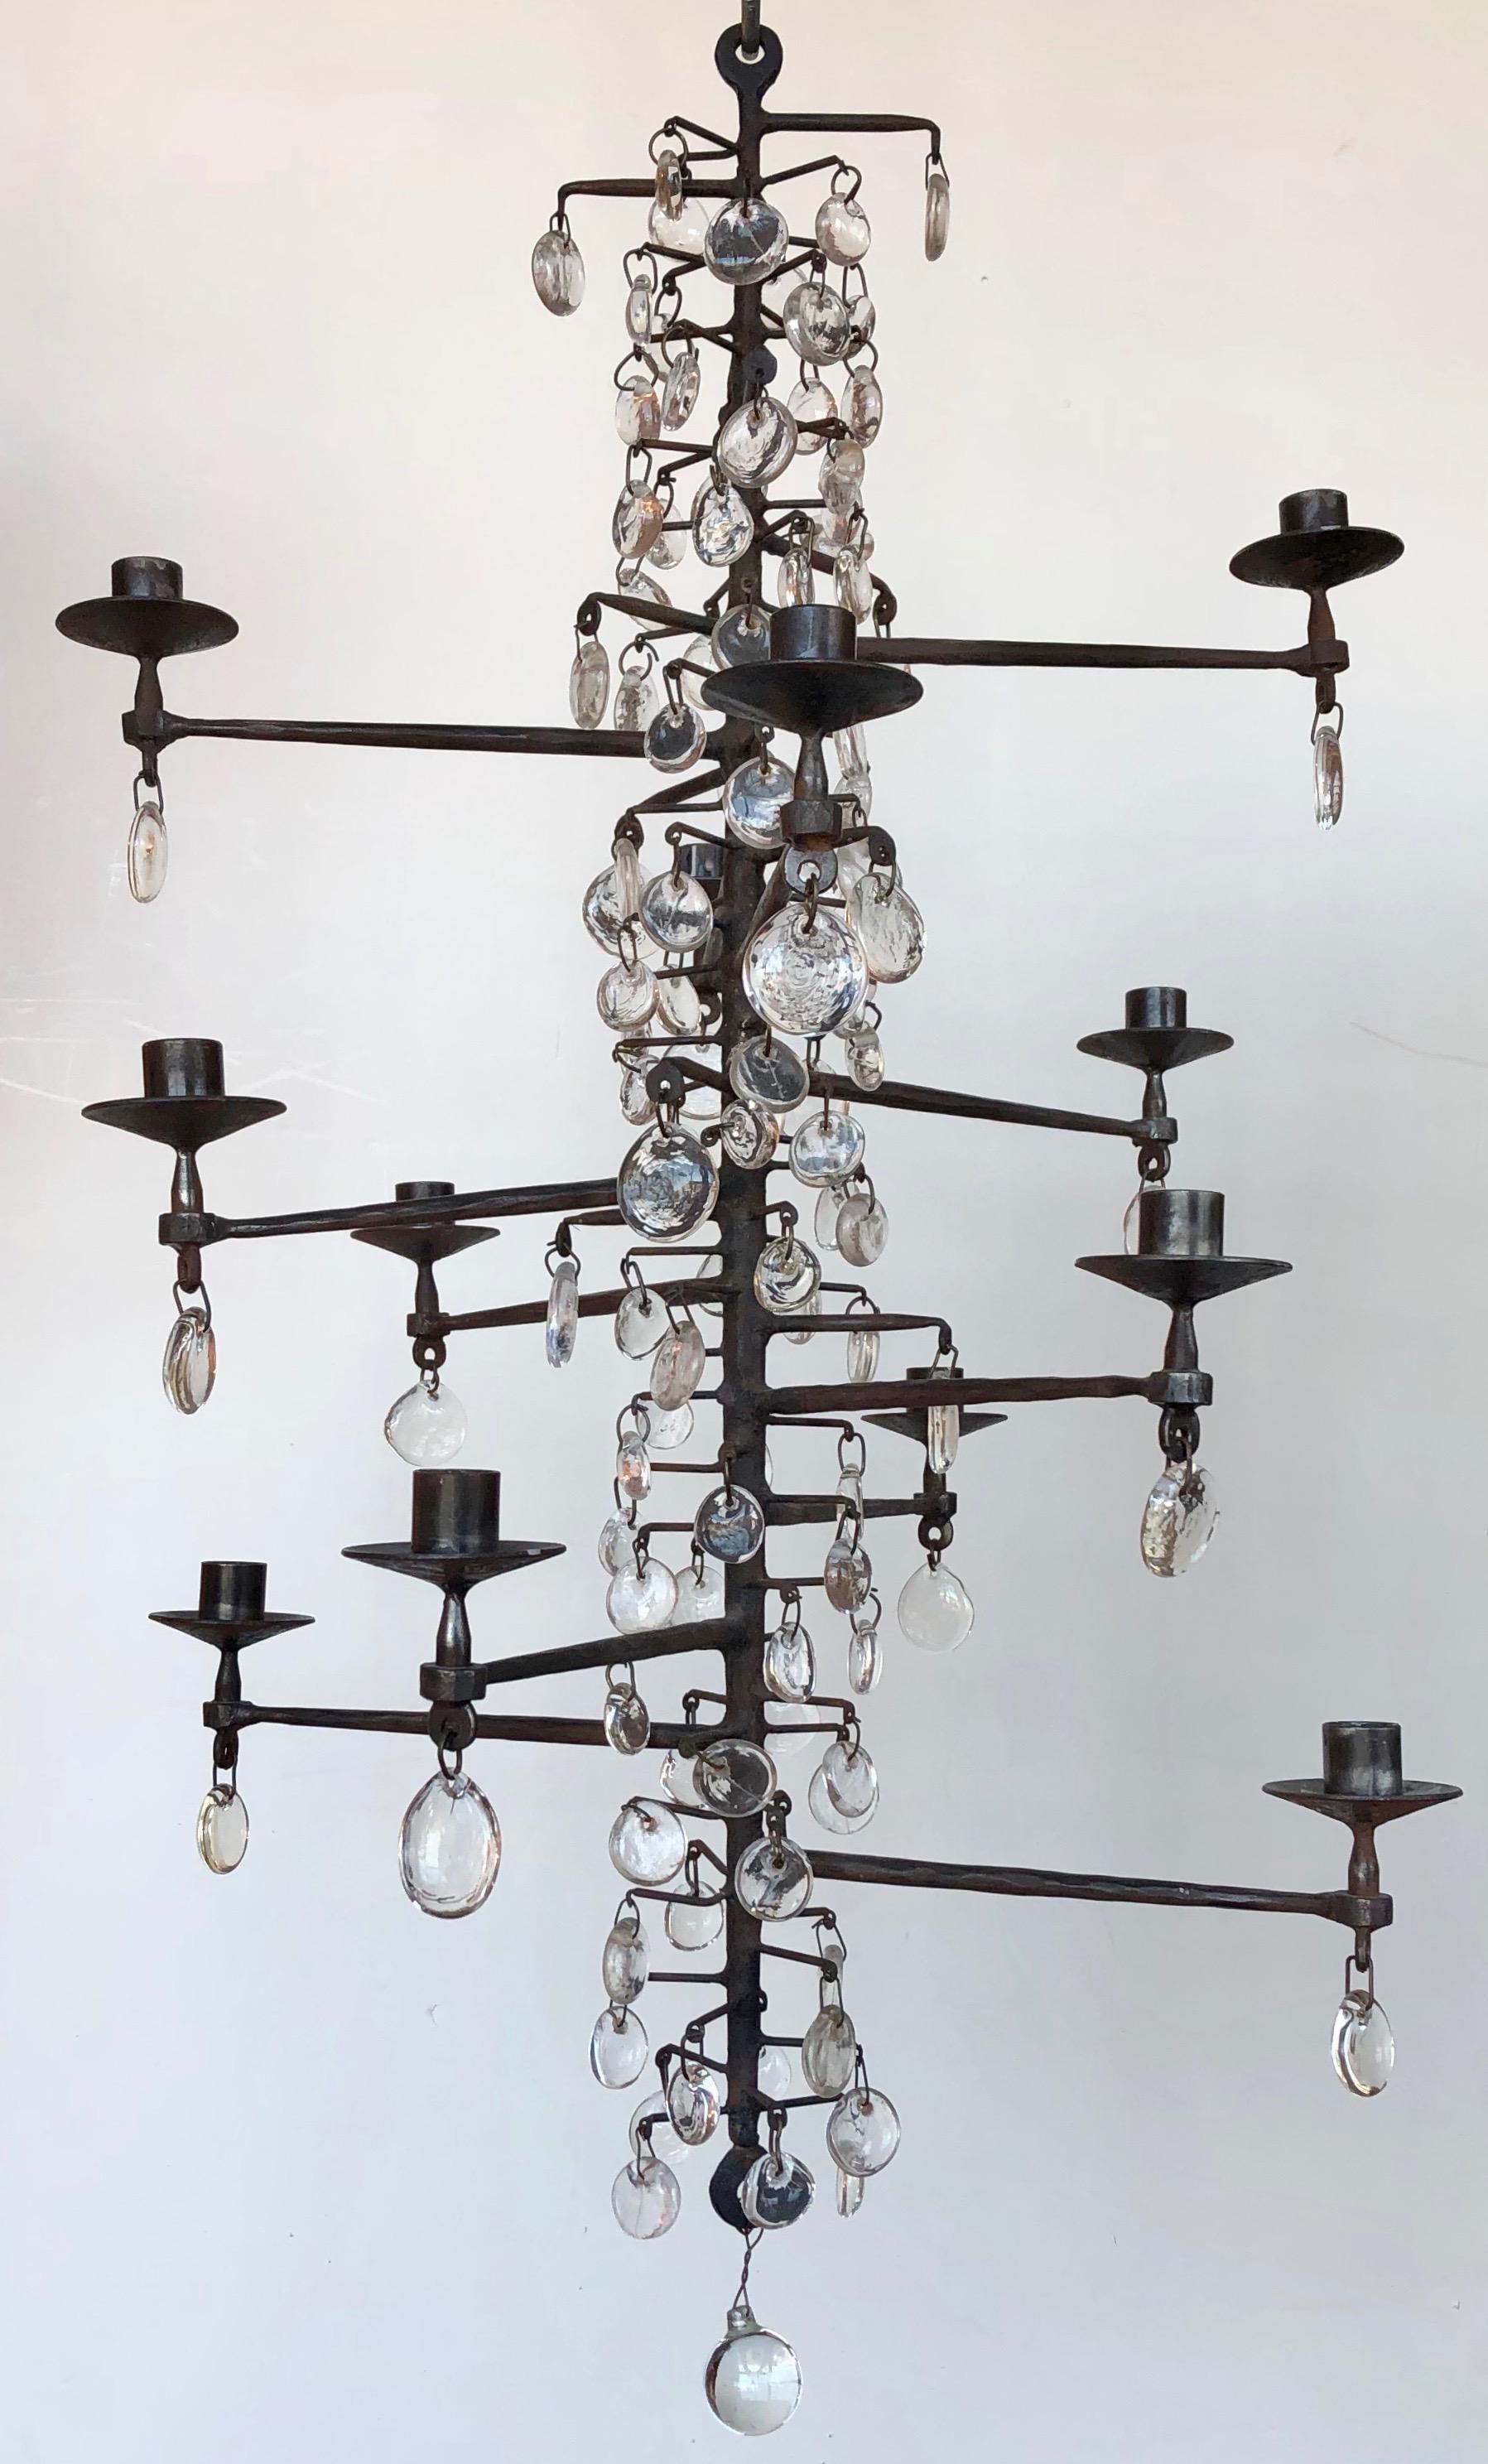 Erik Hoglund twelve candle chandelier with wrought steel structure and blown glass pendants.